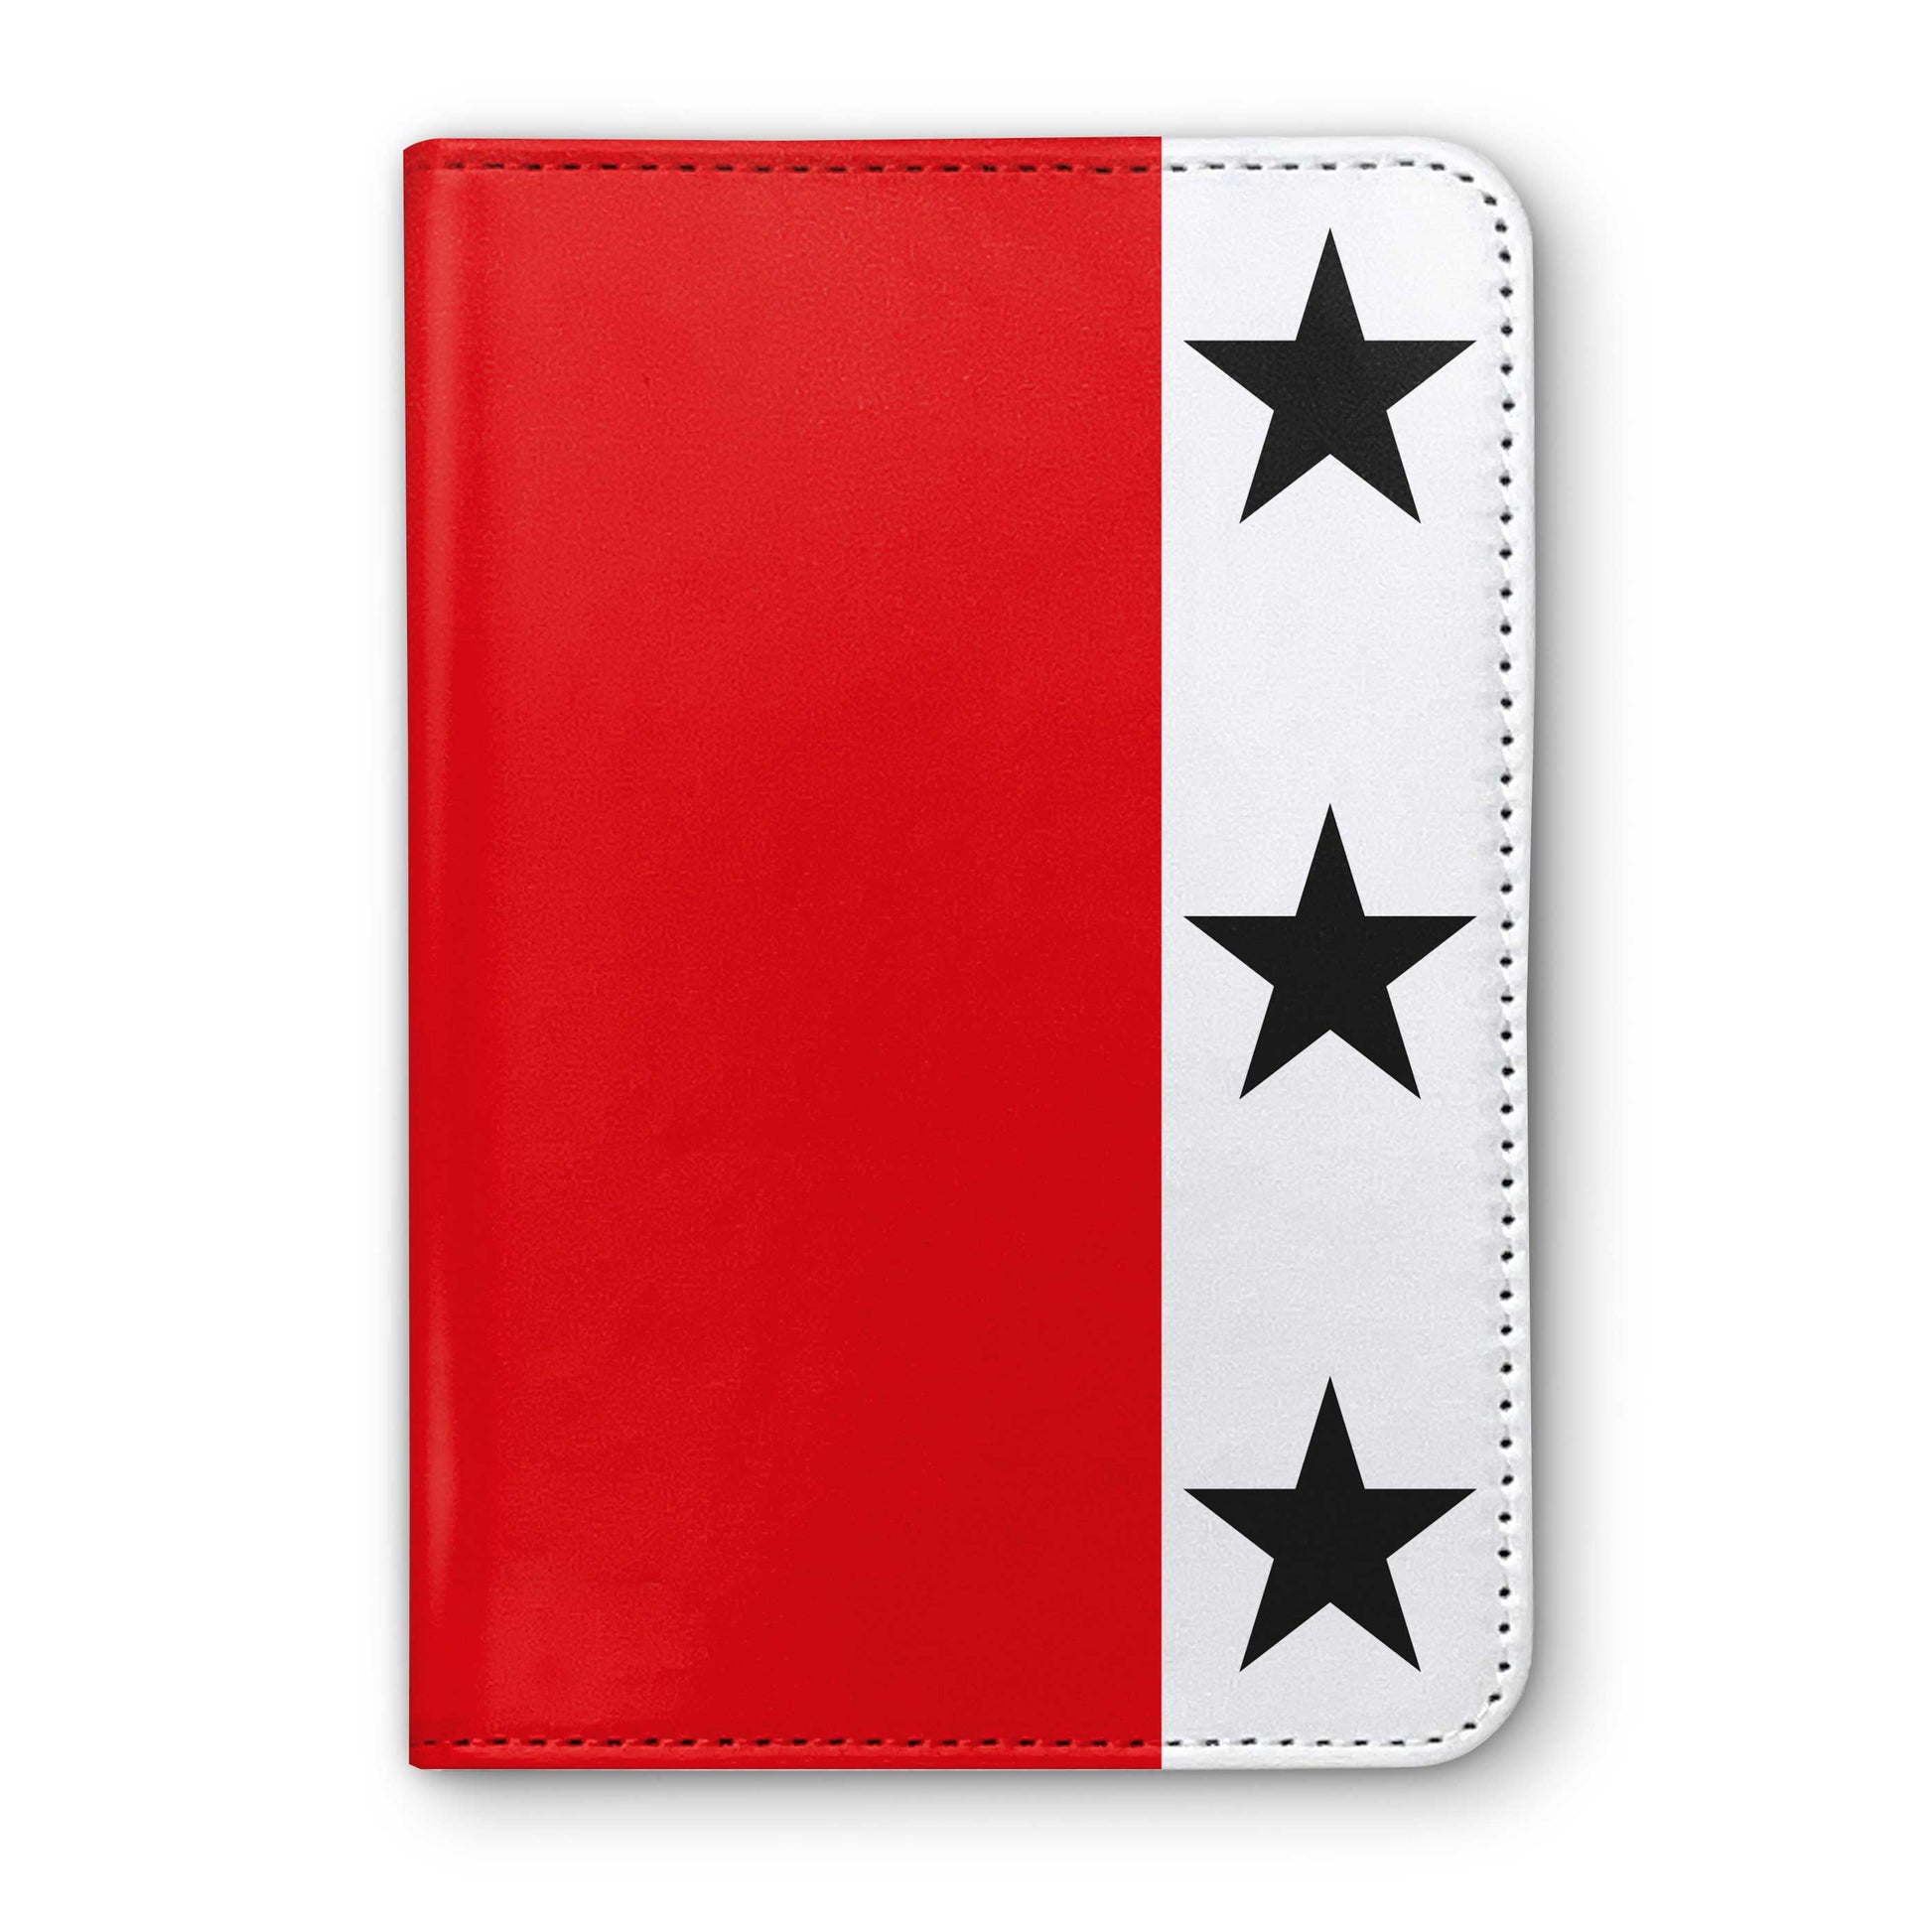 Mezzone Family Horse Racing Passport Holder - Hacked Up Horse Racing Gifts